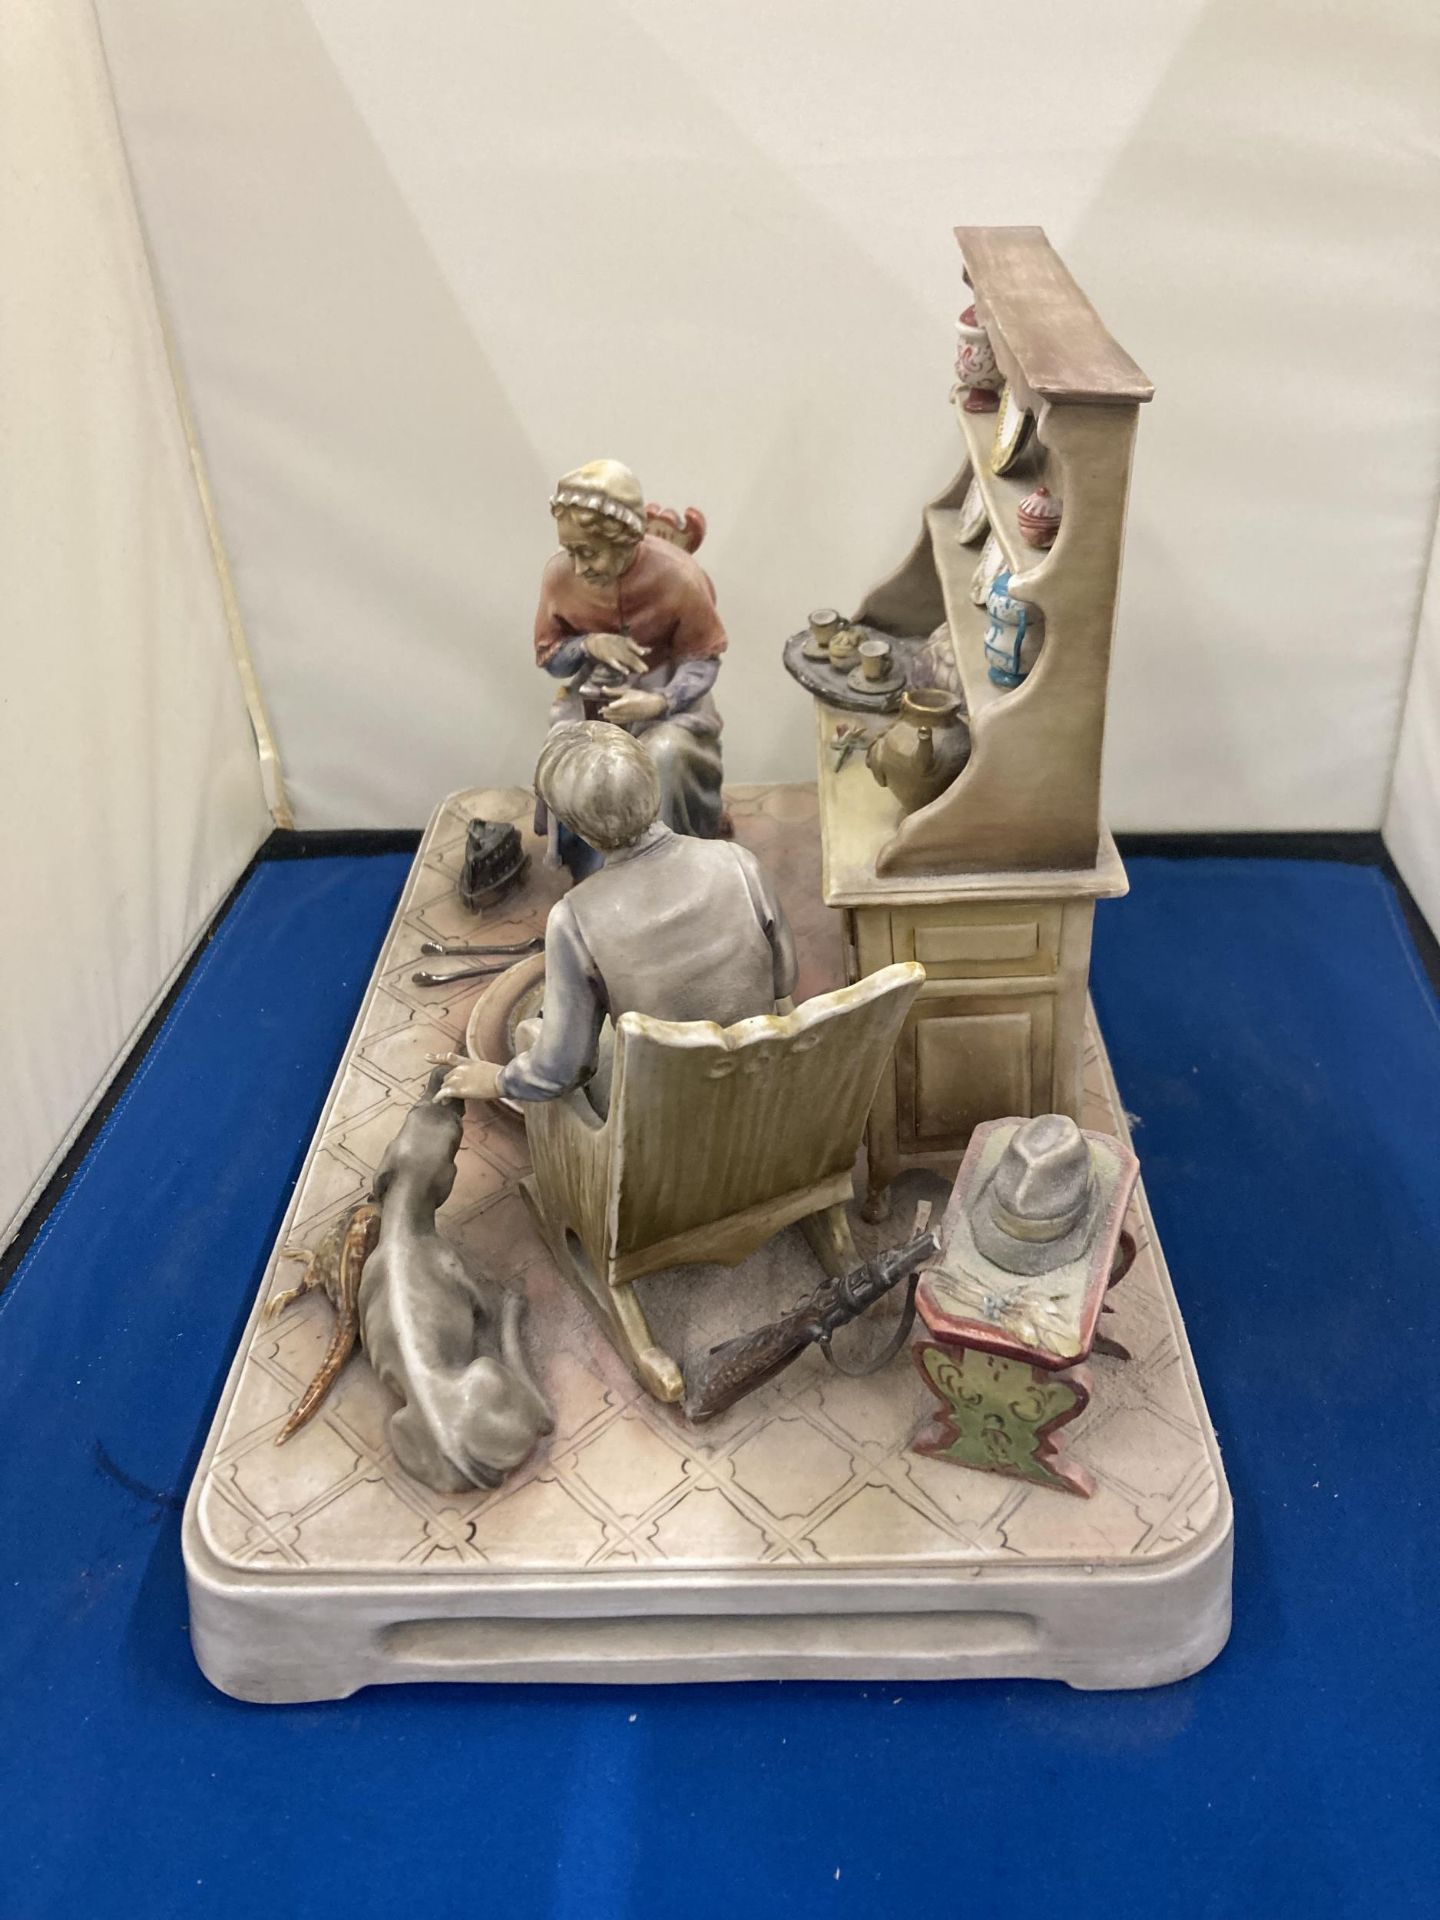 AN A BORSATO MADE IN ITALY FIGURINE OF A KITCHEN SCENE - Image 2 of 4